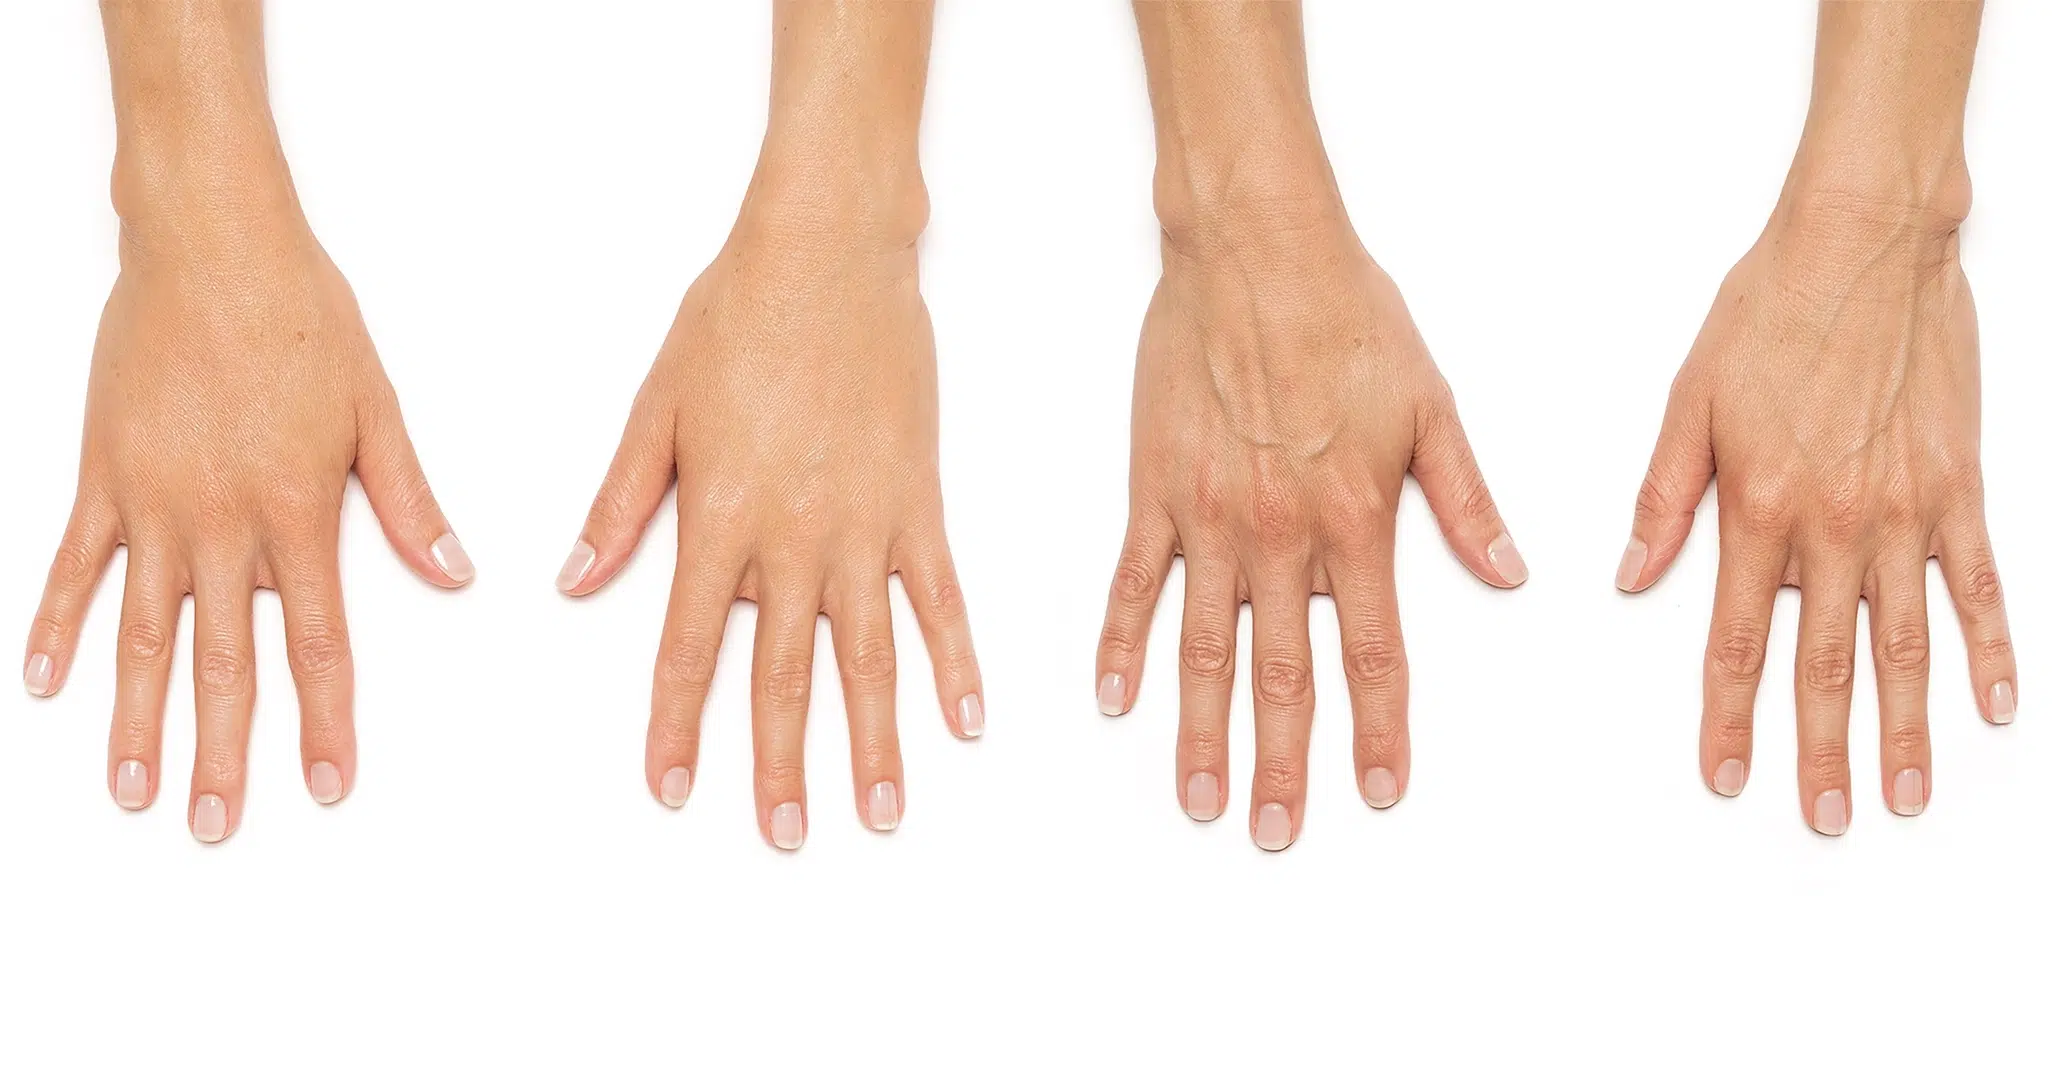 A persons hands before and after receiving Radiesse treatment